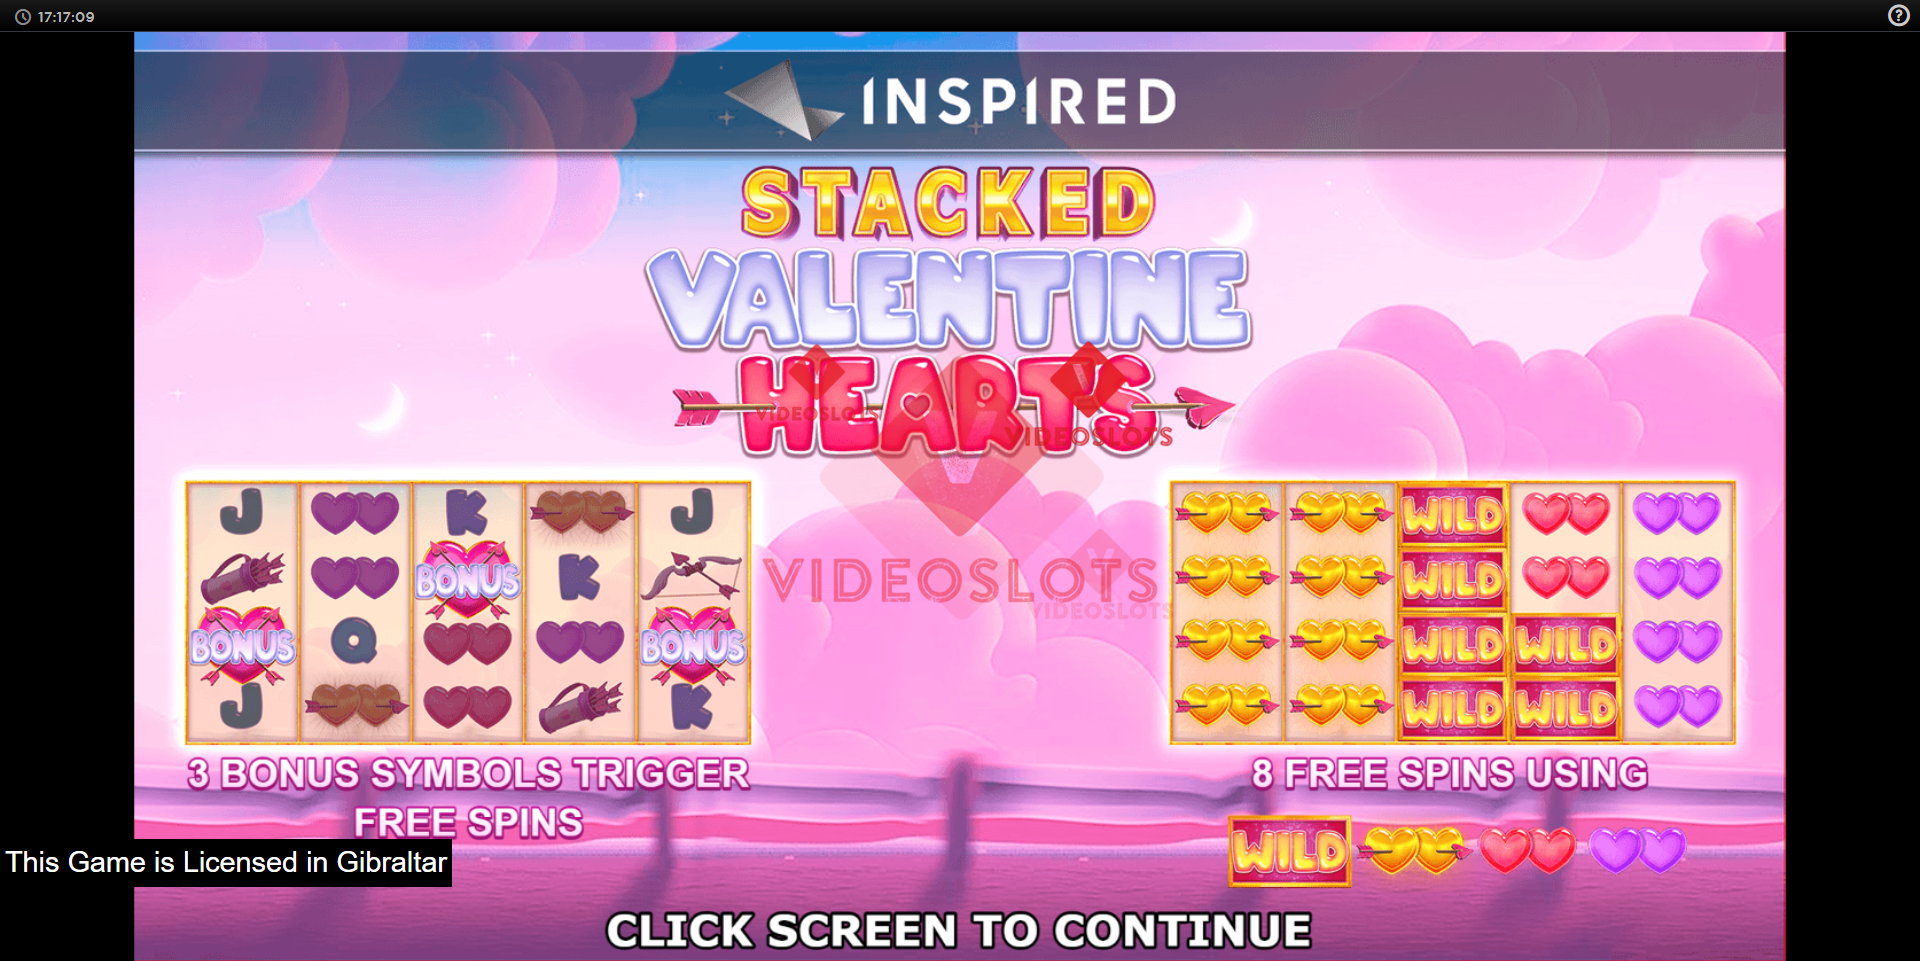 Game Intro for Stacked Valentine Hearts slot from Inspired Gaming